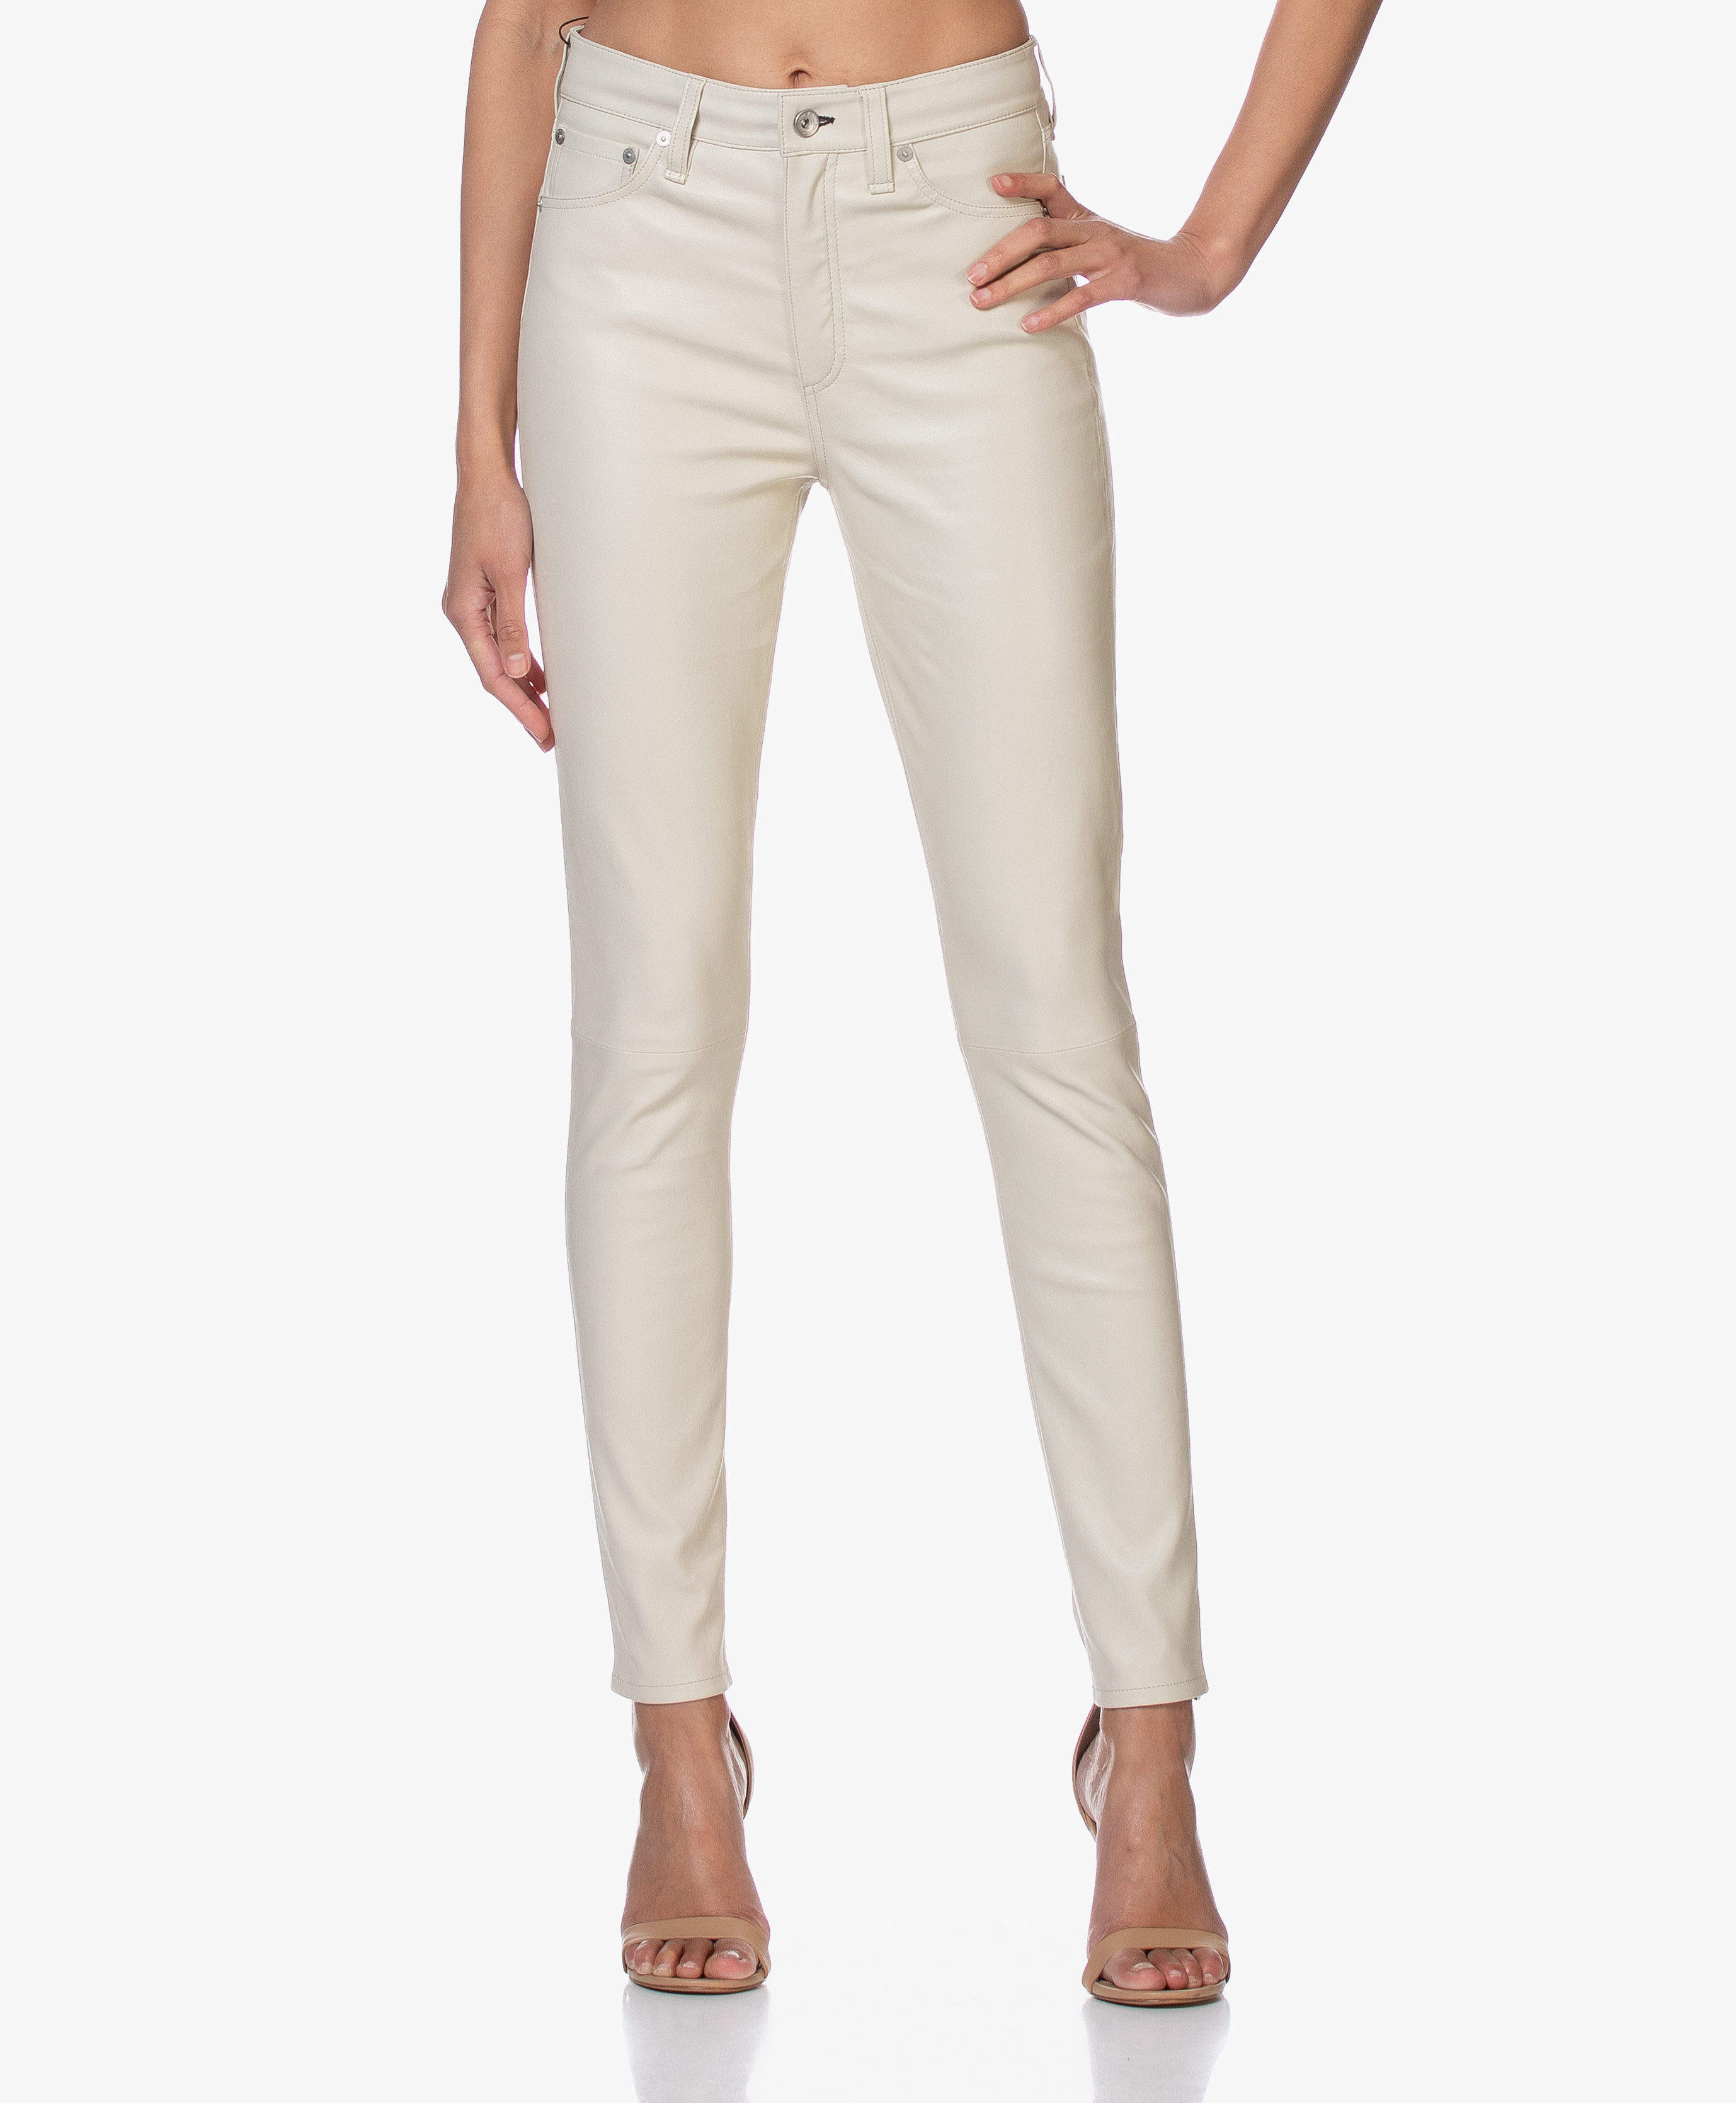 white leather skinny pants